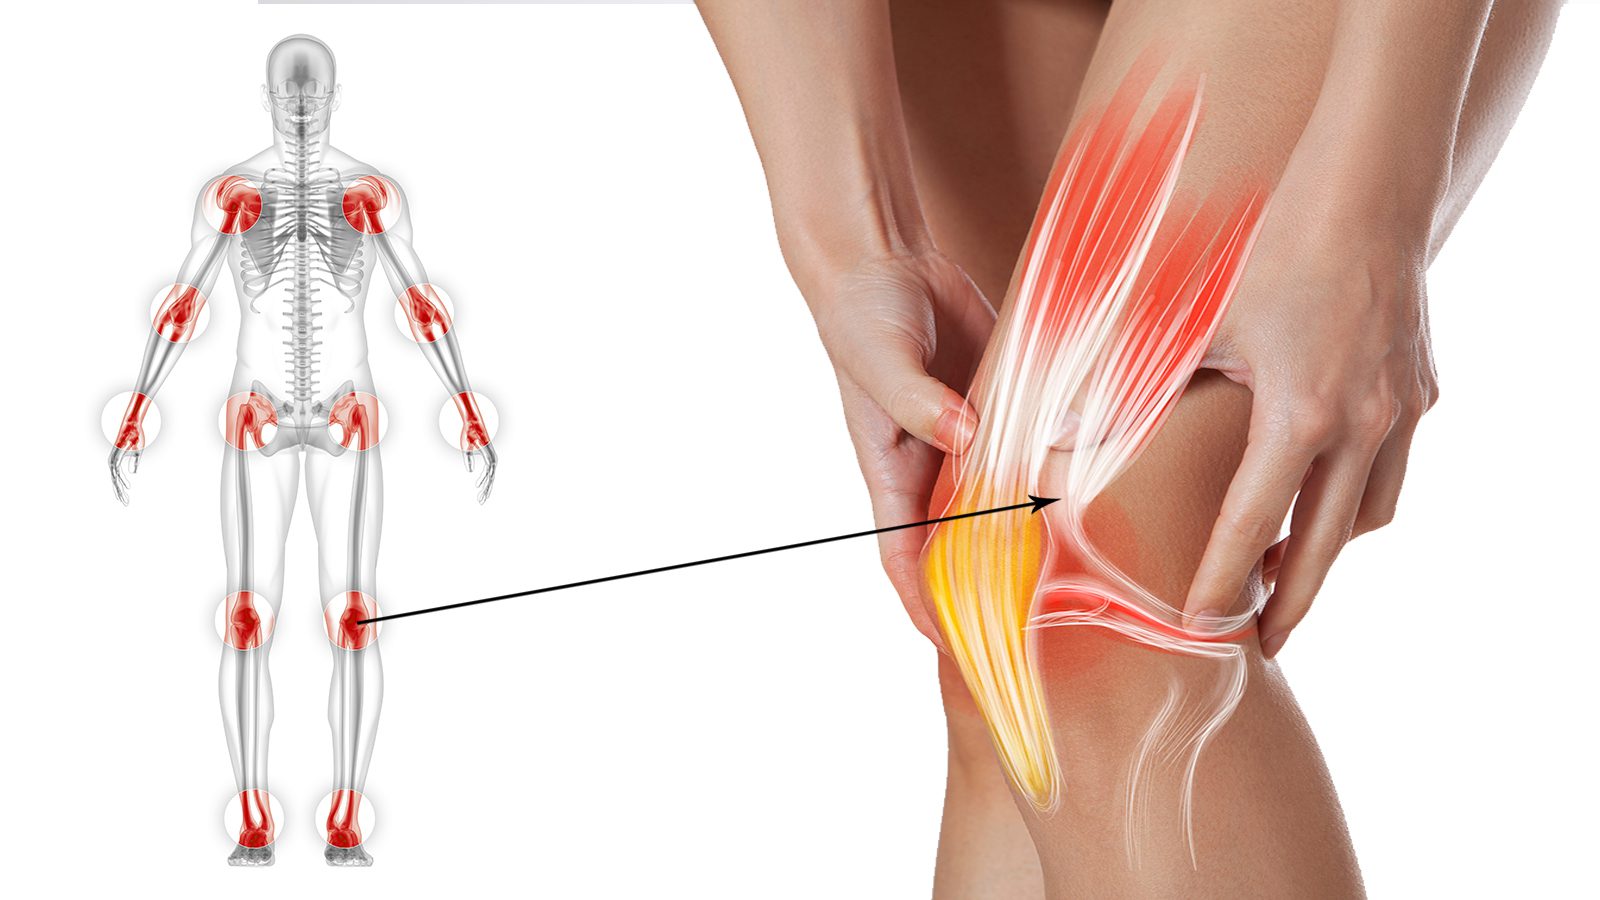 How to Get Joint Pain Relief Without Medicine